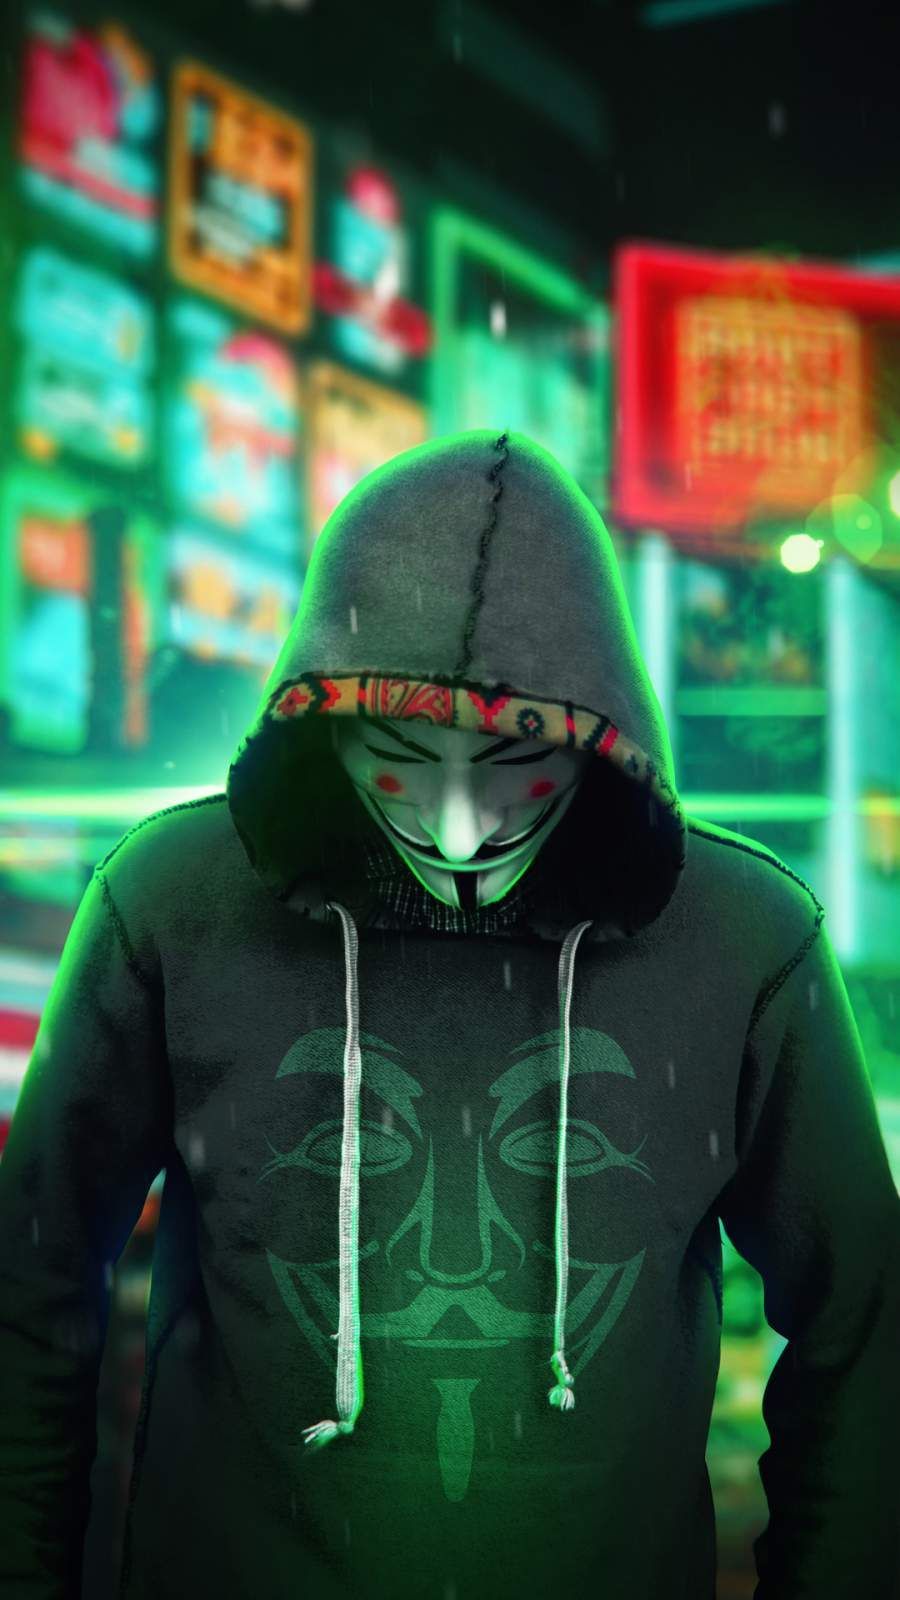 Anonymus Man Hoodie iPhone Wallpaper. Hipster wallpaper, Joker iphone wallpaper, Superhero wallpaper iphone